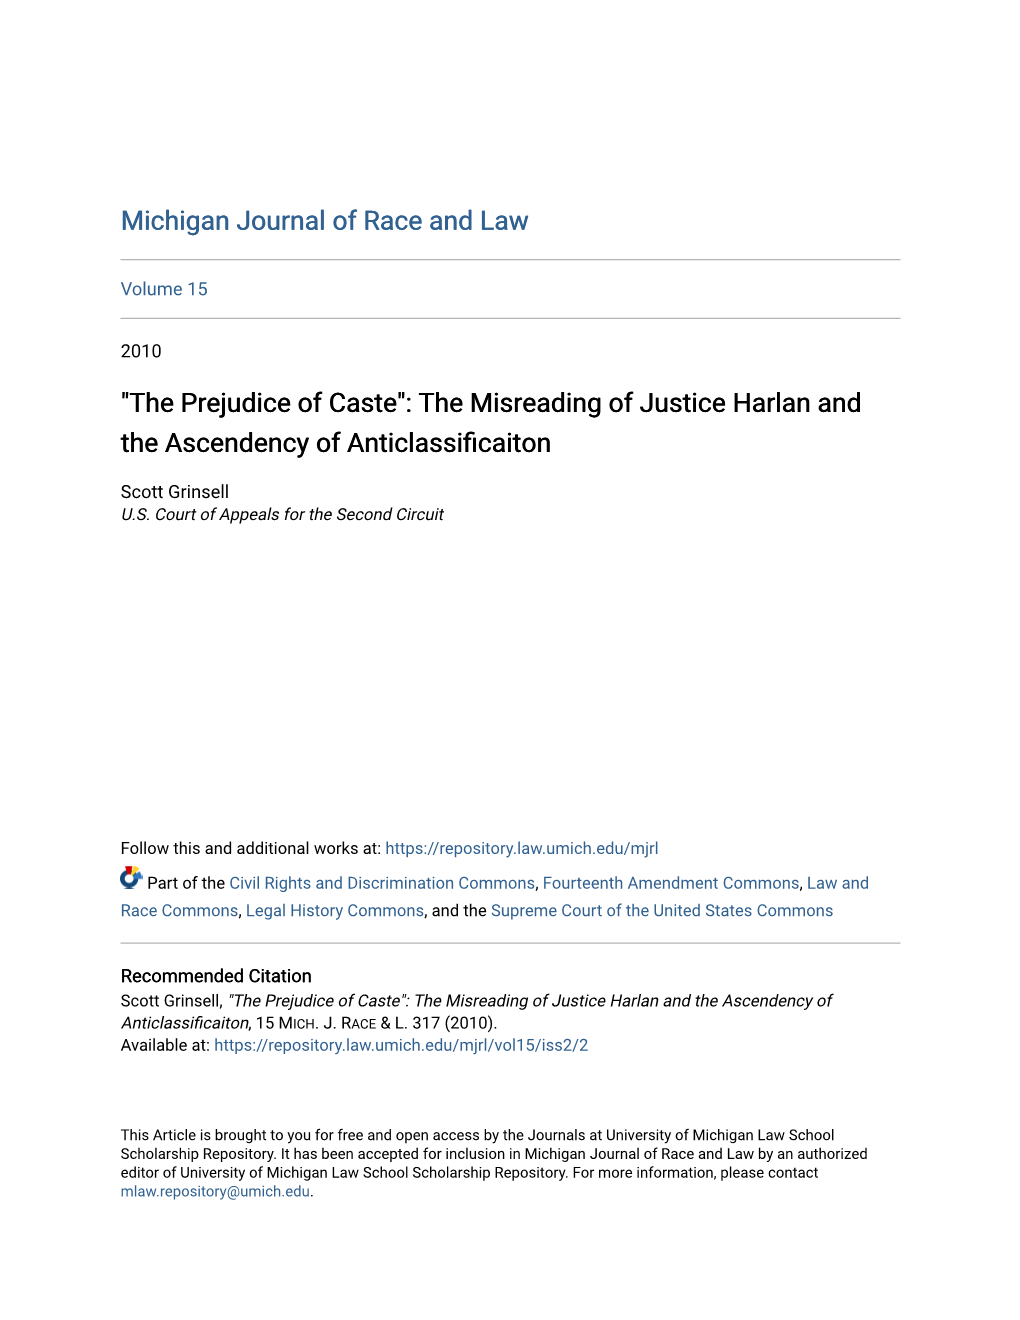 "The Prejudice of Caste": the Misreading of Justice Harlan and the Ascendency of Anticlassificaiton